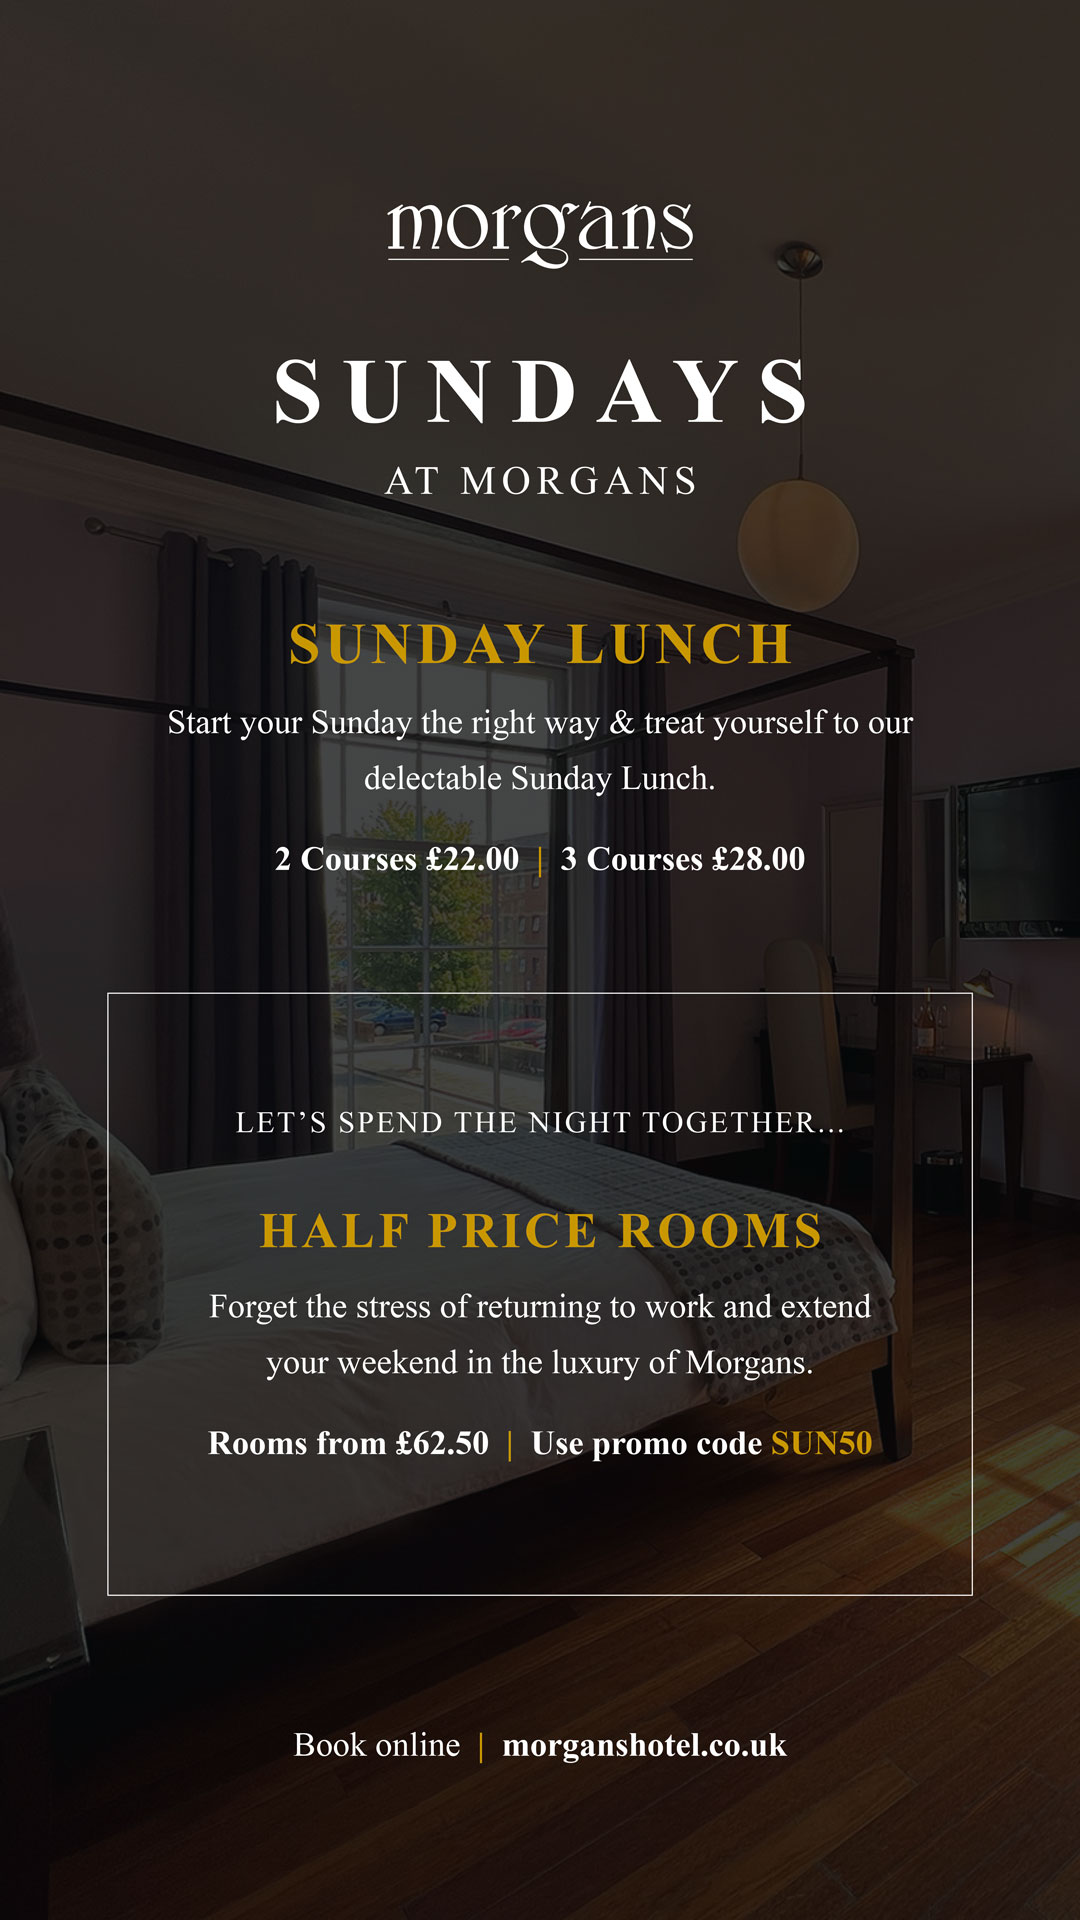 Morgans Sunday Lunch Ad